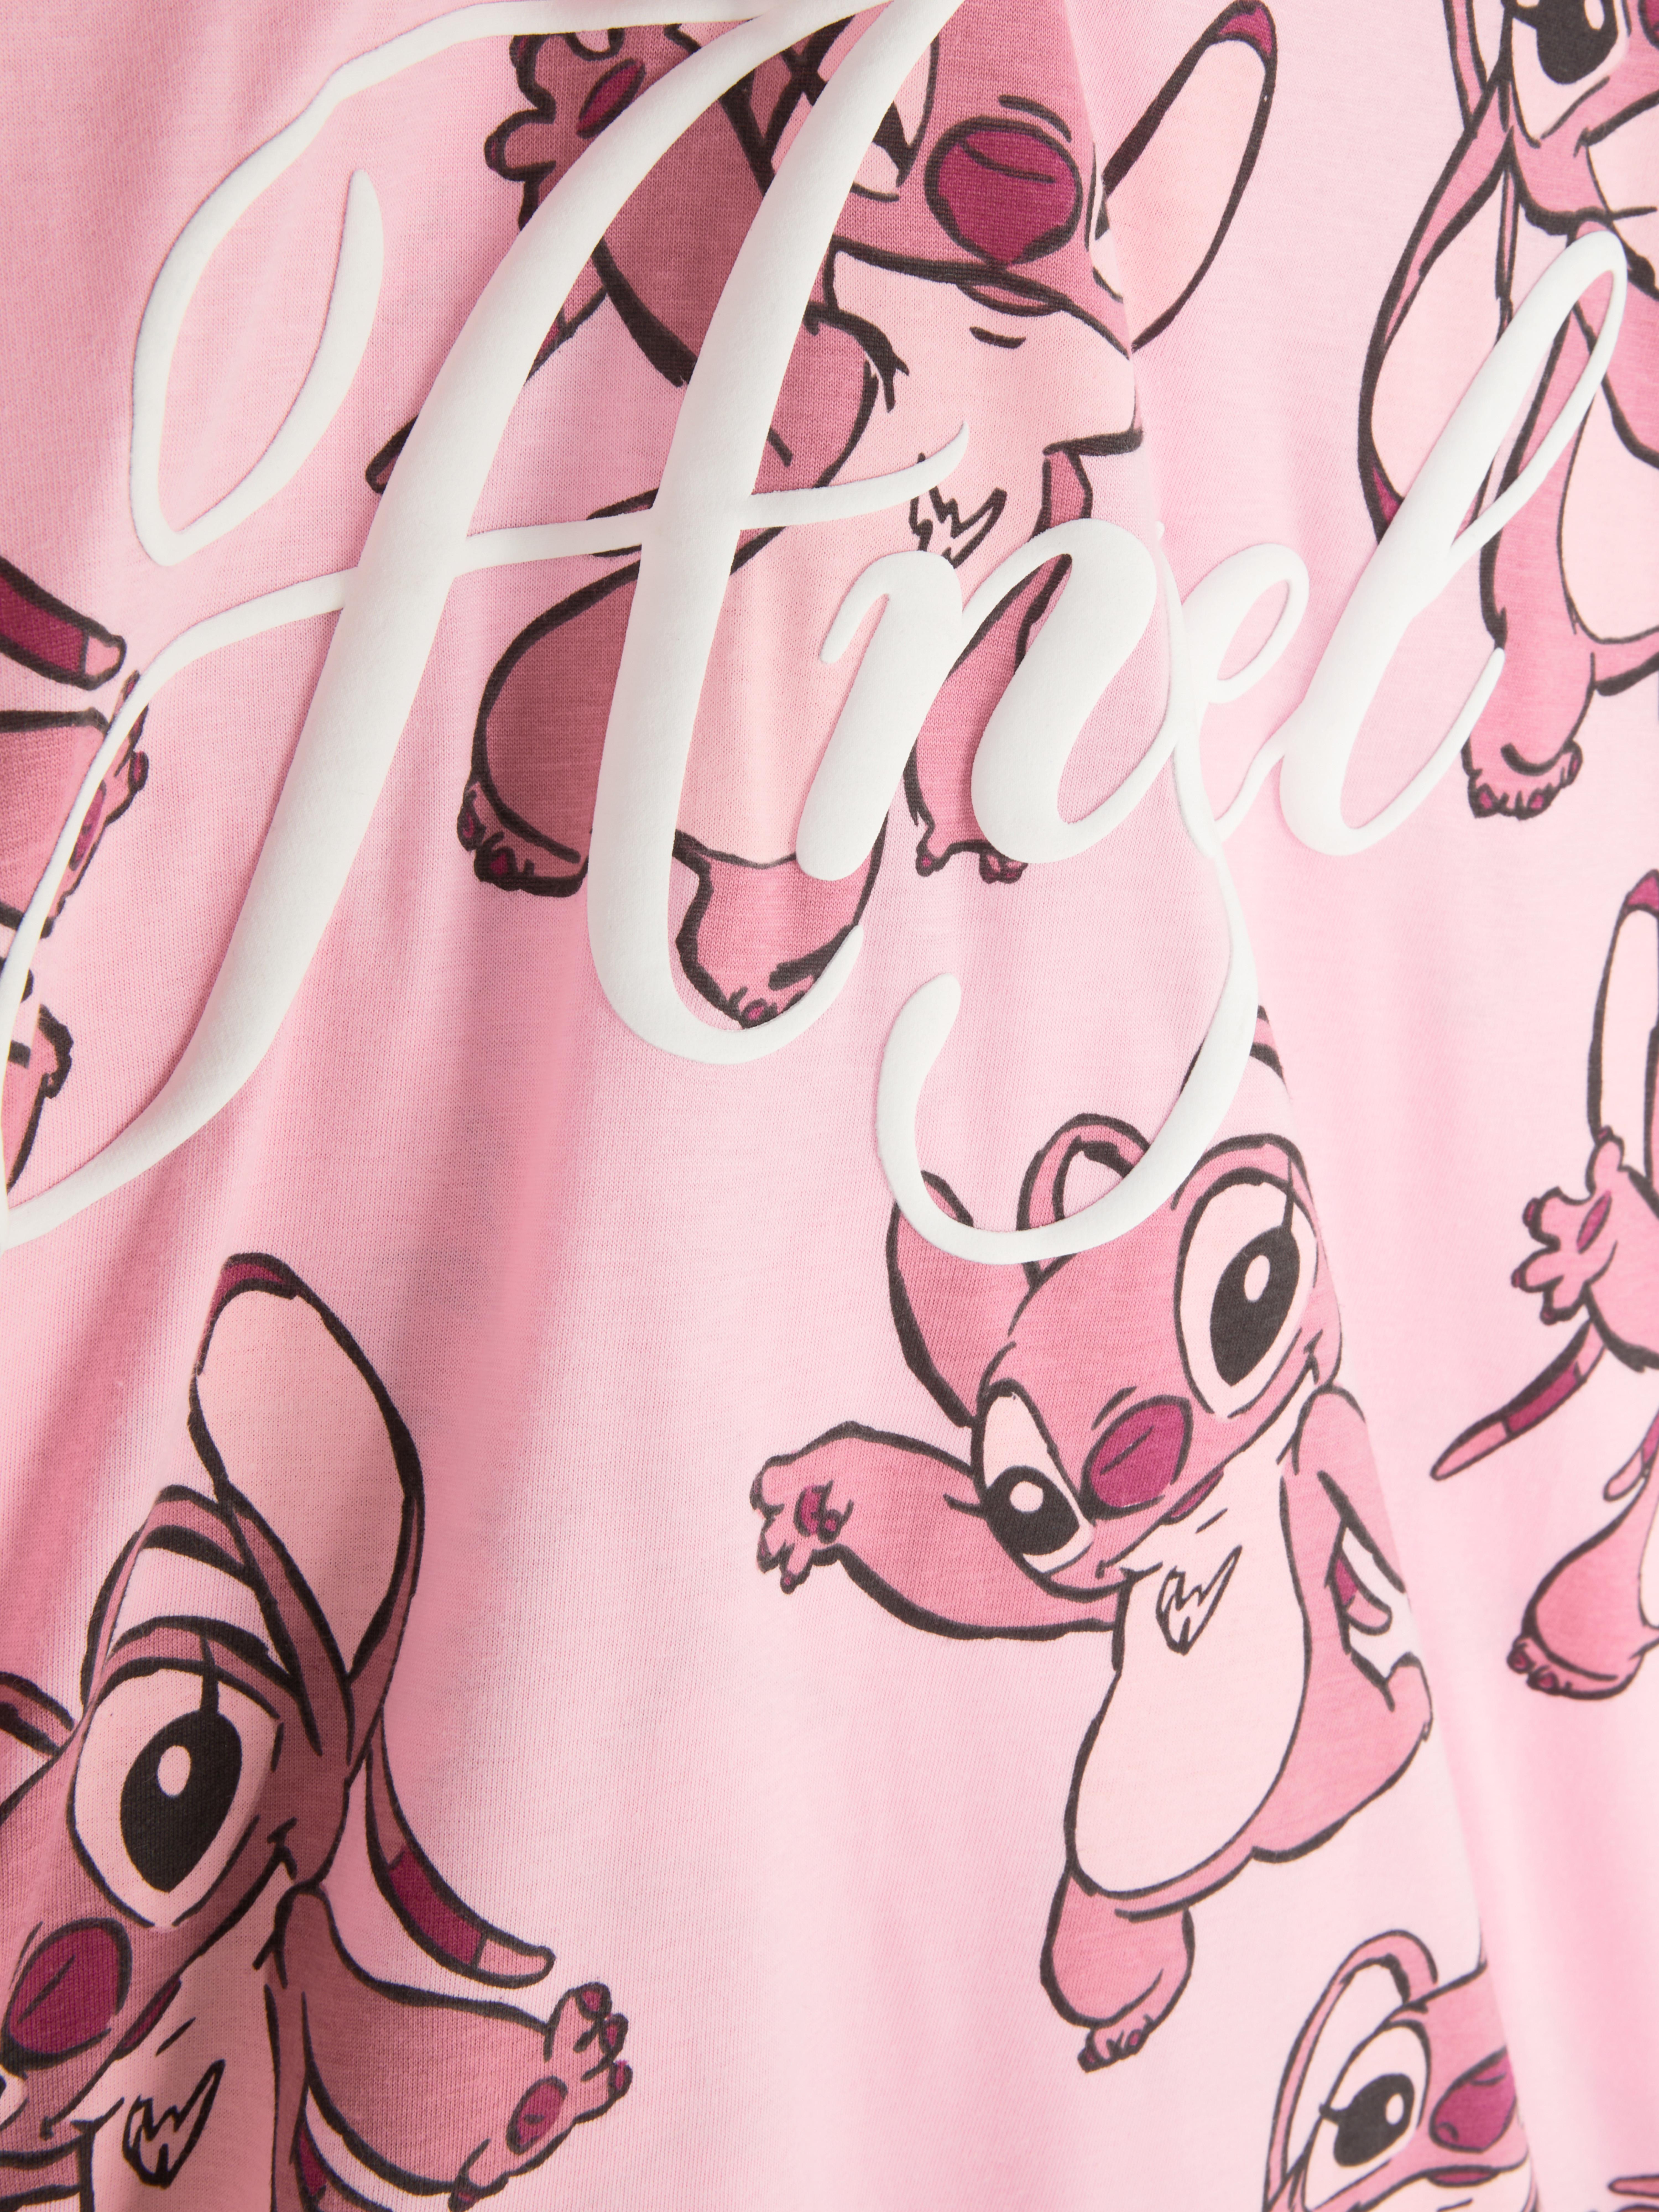 Primark - New #PrimarkXDisney pjs have landed, featuring Disney's Stitch  and Angel 💗 Prices from £7